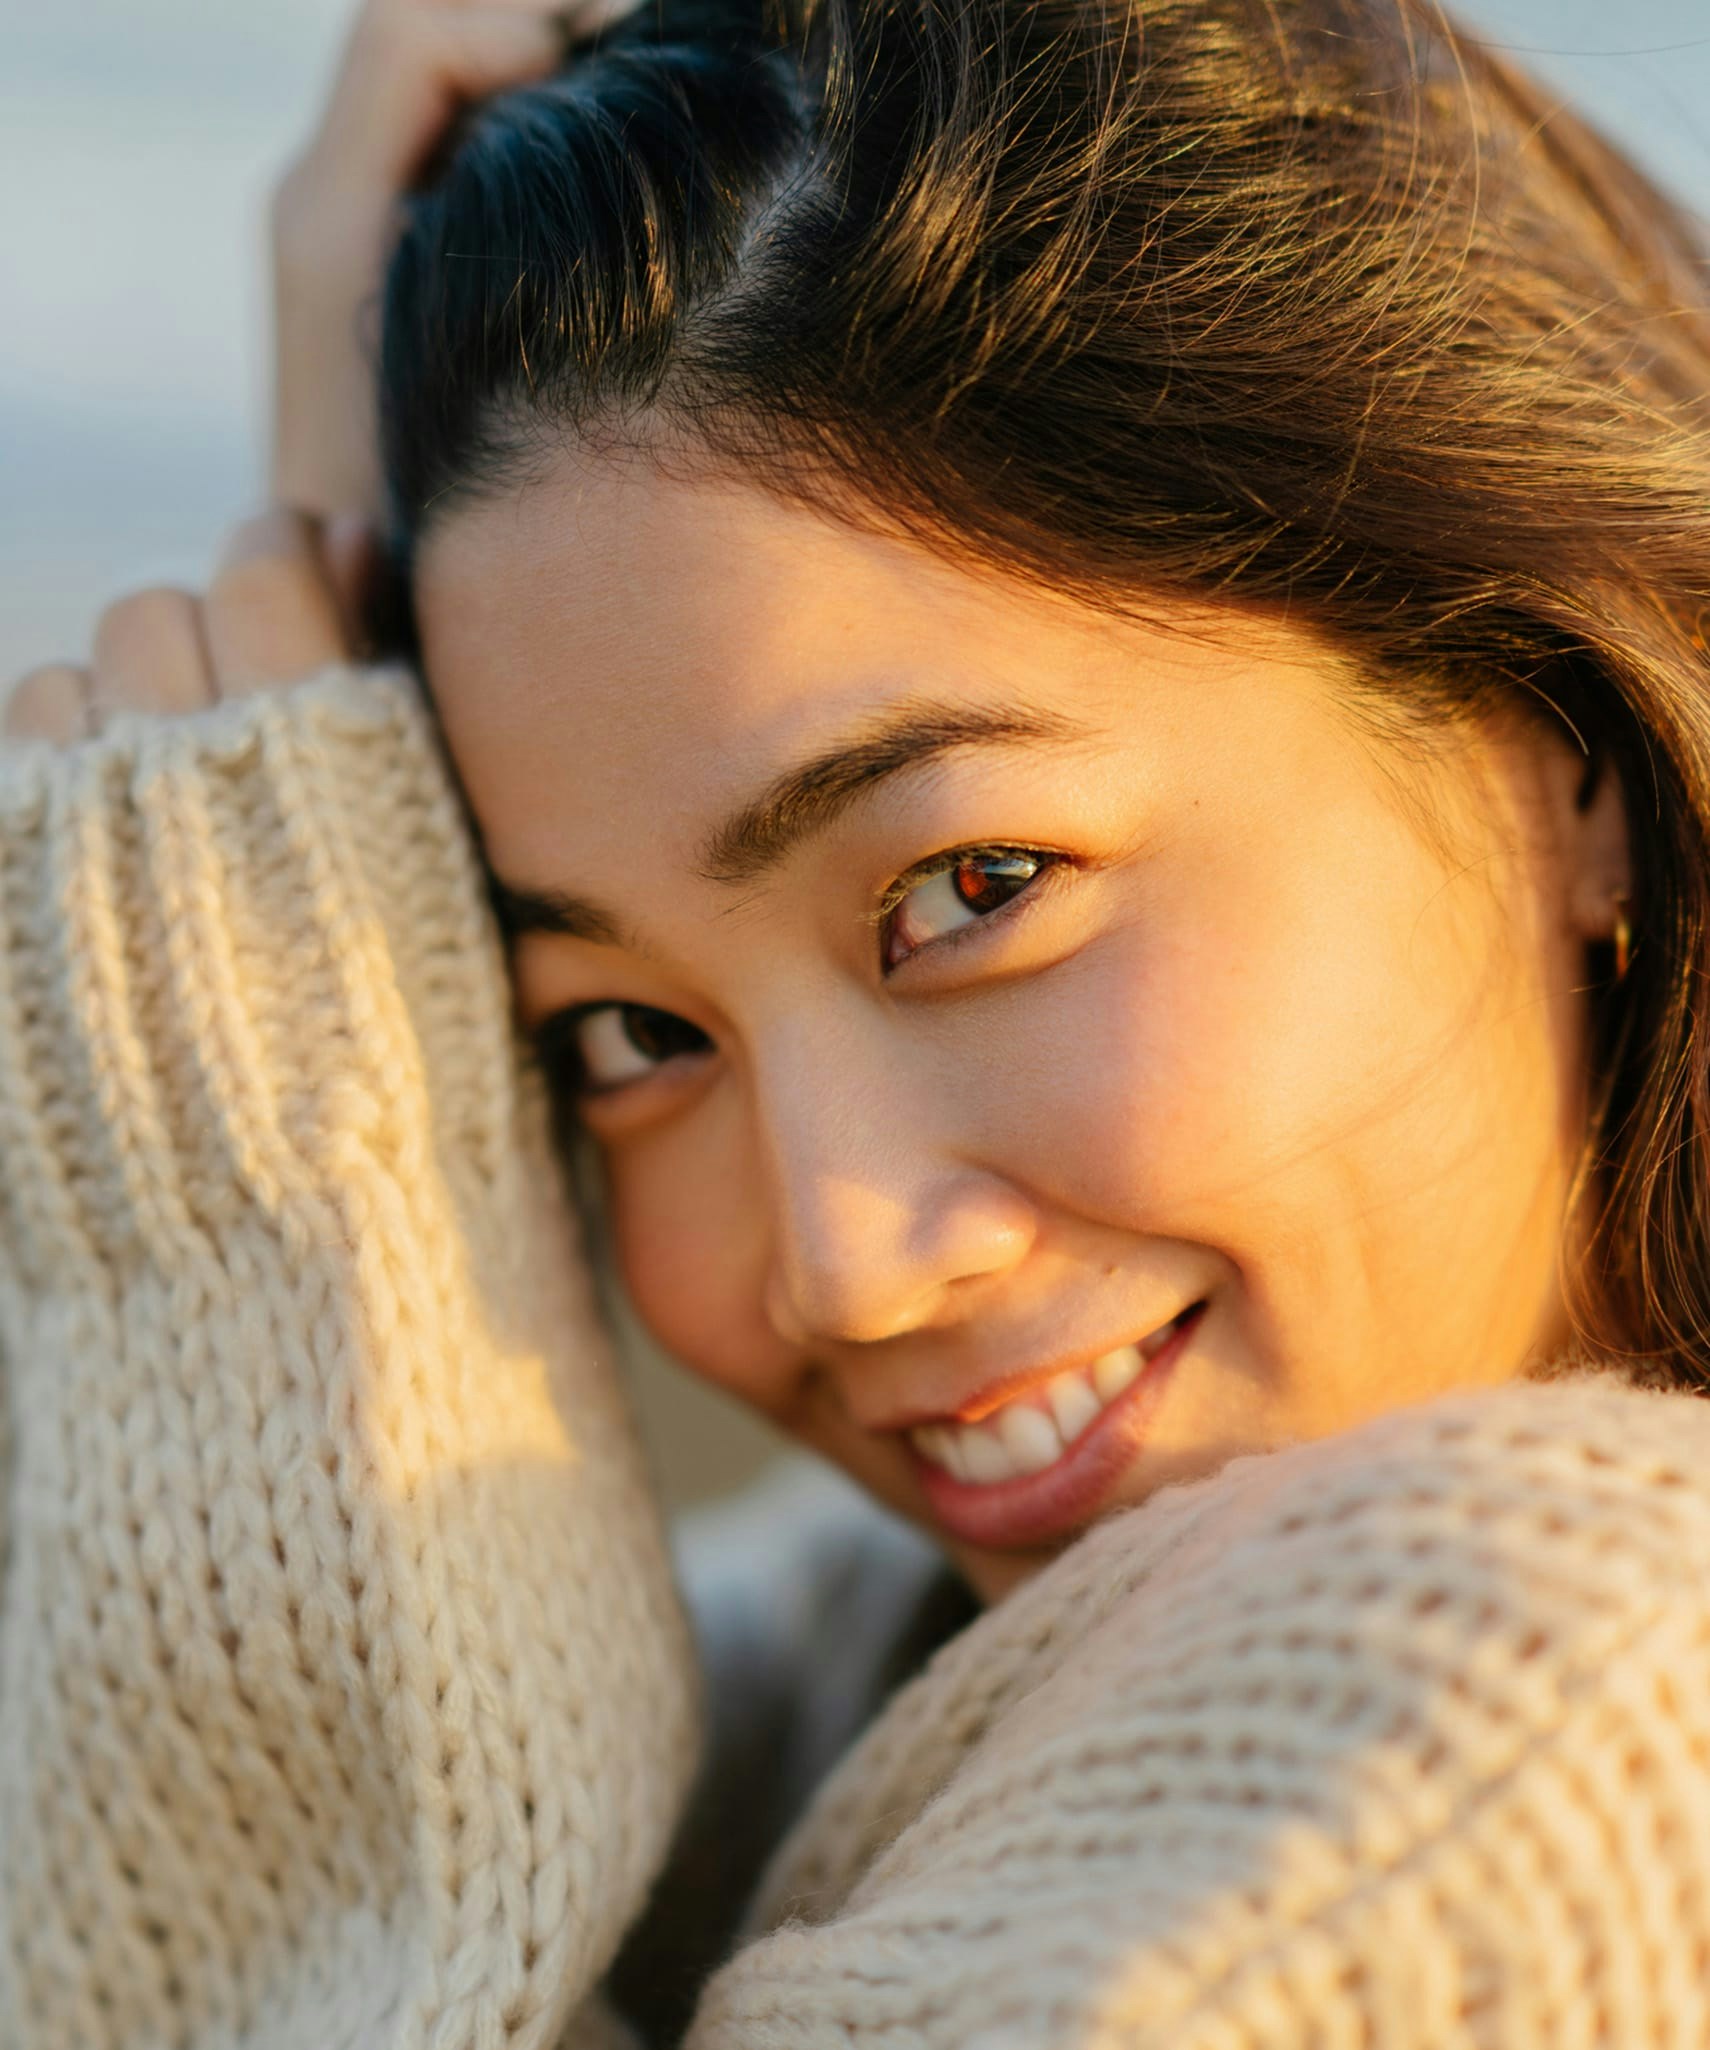 Woman in knitted sweater smiling